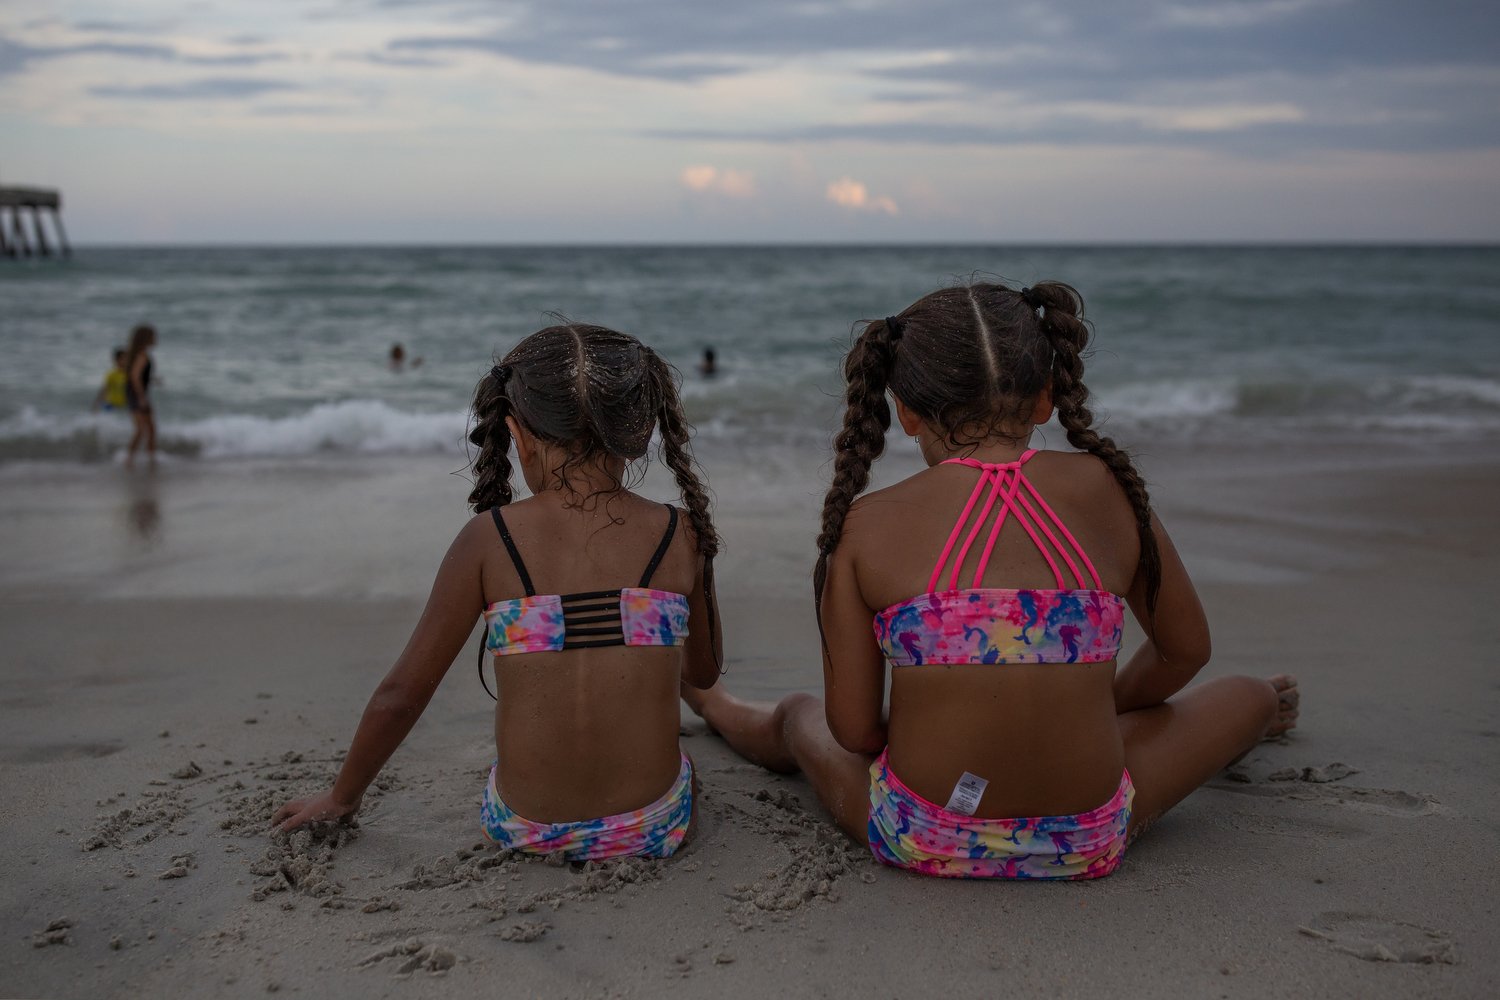  Gianna Olea, 5, left, and Katie Olea, 6, right, sit in the sand at Wrightsville Beach, North Carolina. Their mom Francisca Castro explained that the family all agreed that it was too hot to come to the beach in the middle of the day and preferred to